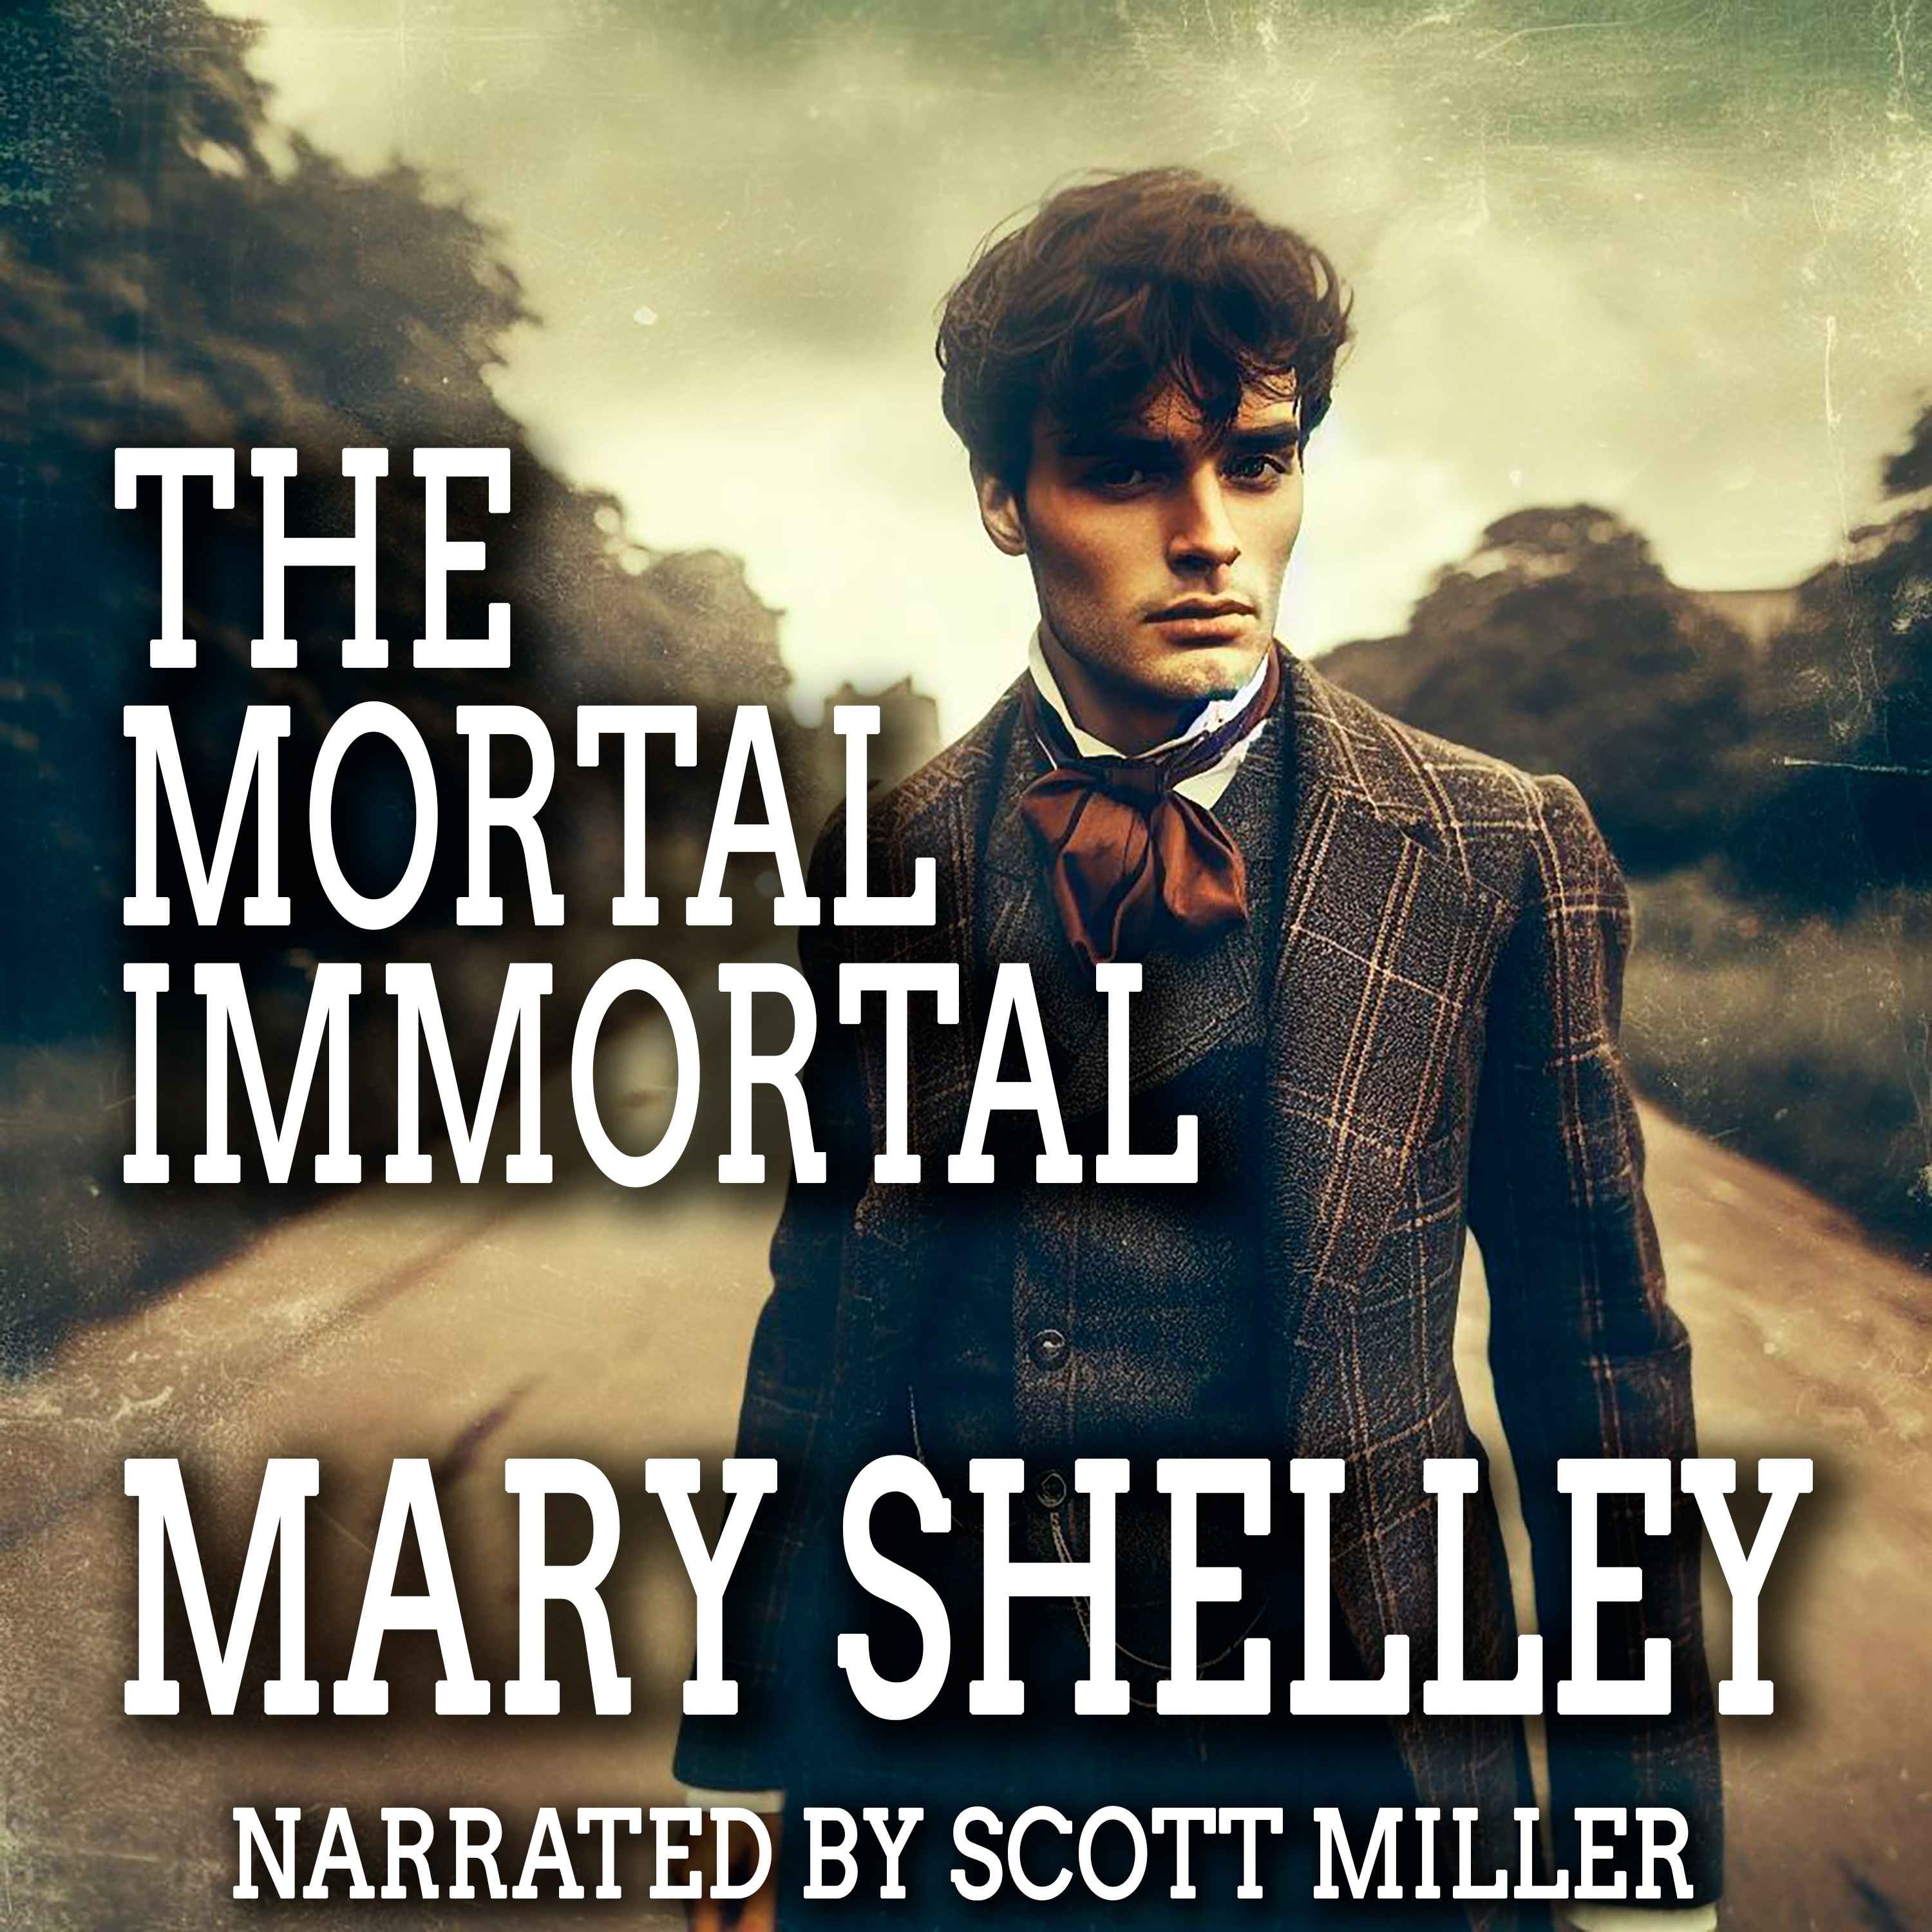 The Mortal Immortal by Mary Shelley - Mary Shelley Short Stories